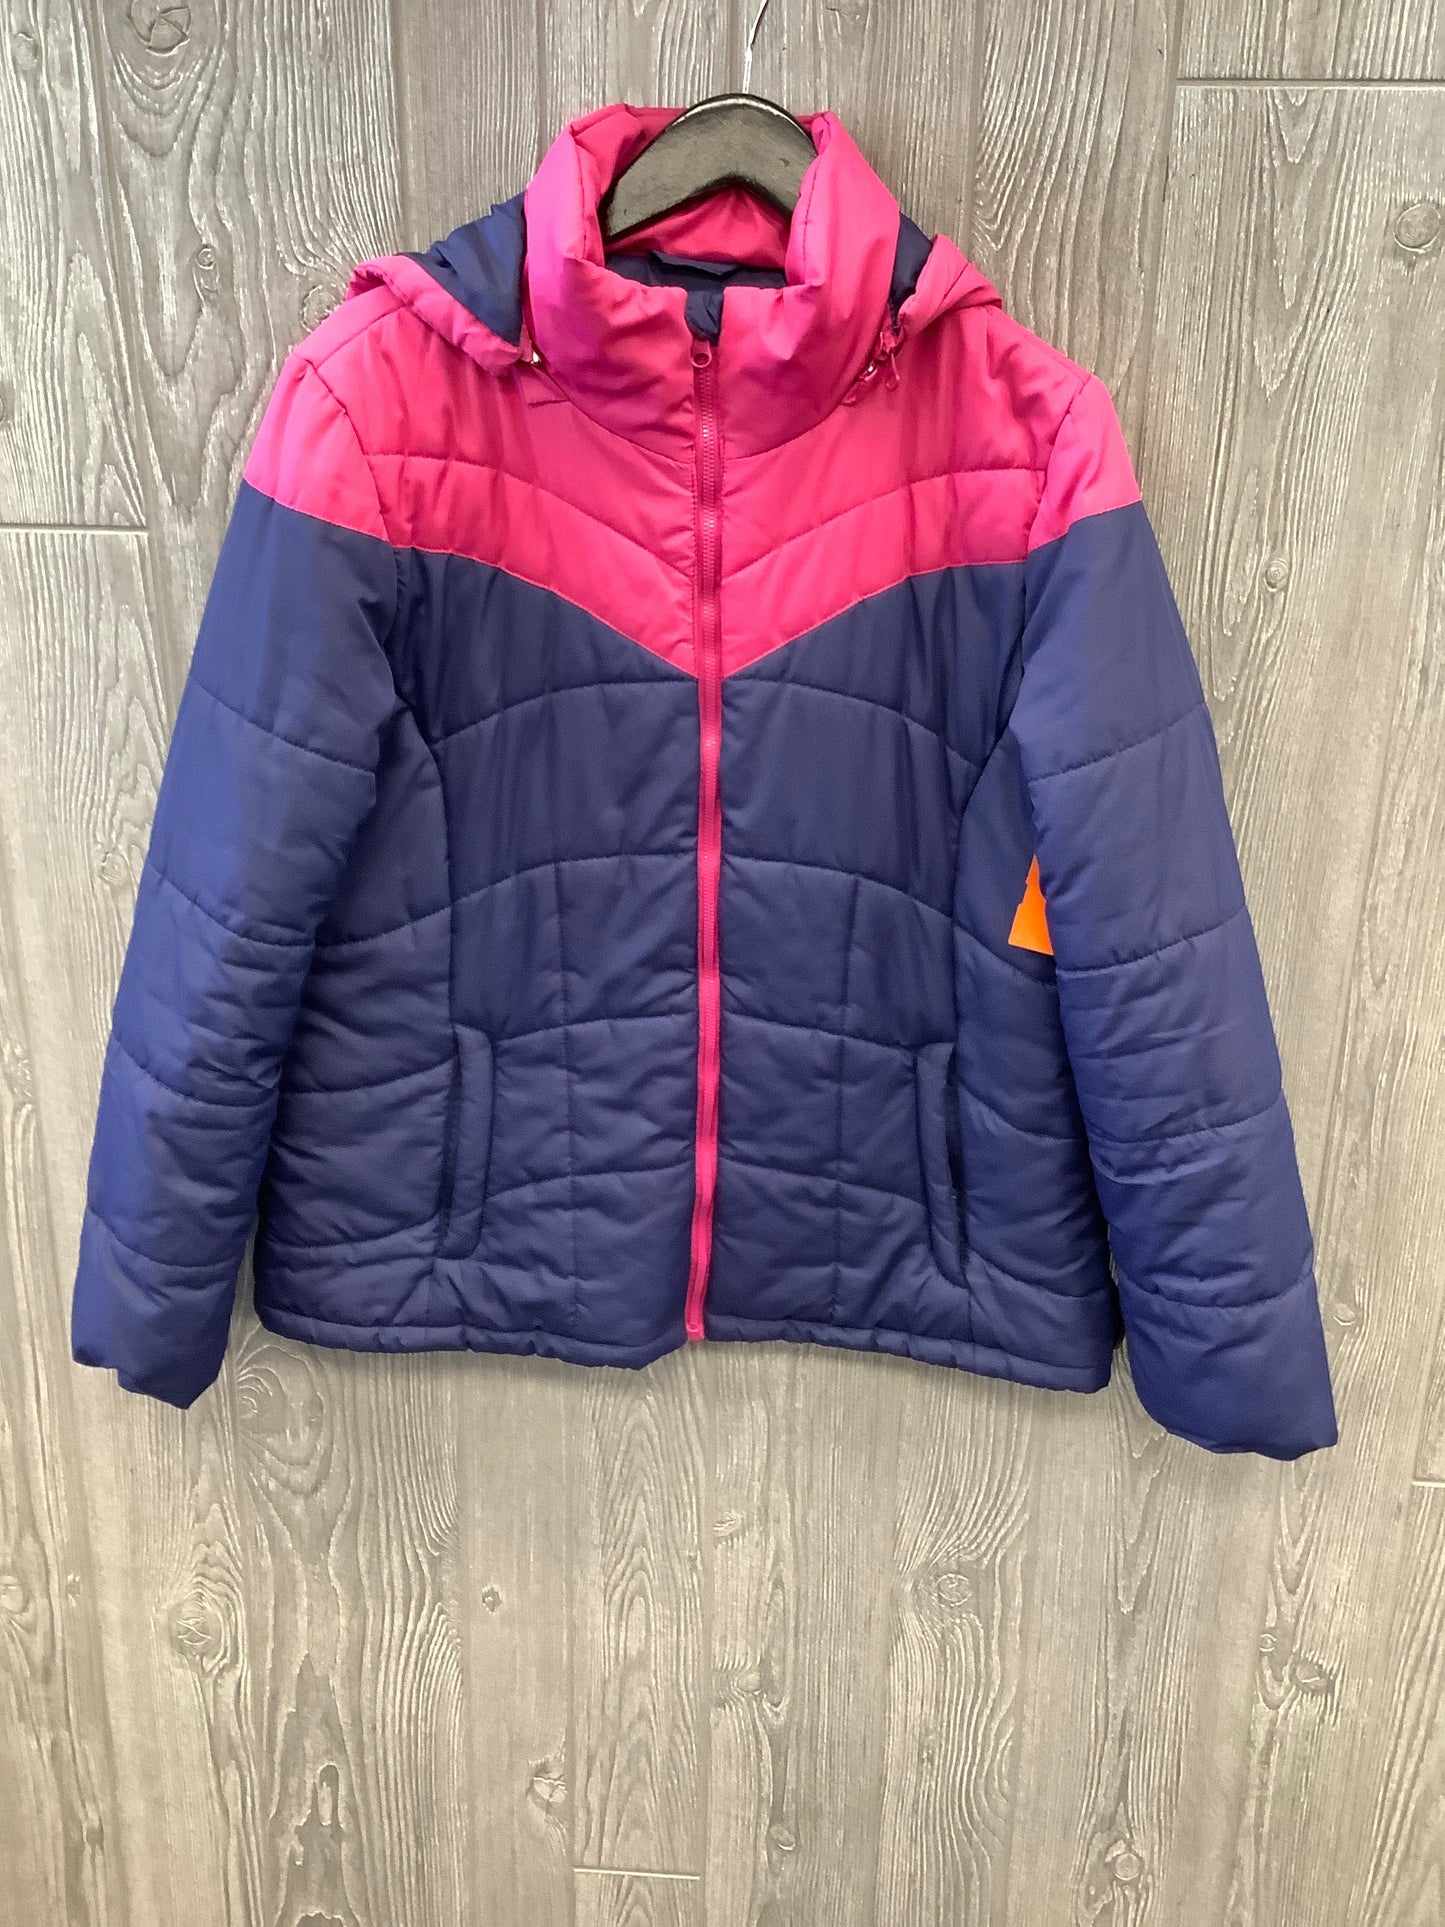 Coat Puffer & Quilted By Clothes Mentor  Size: L